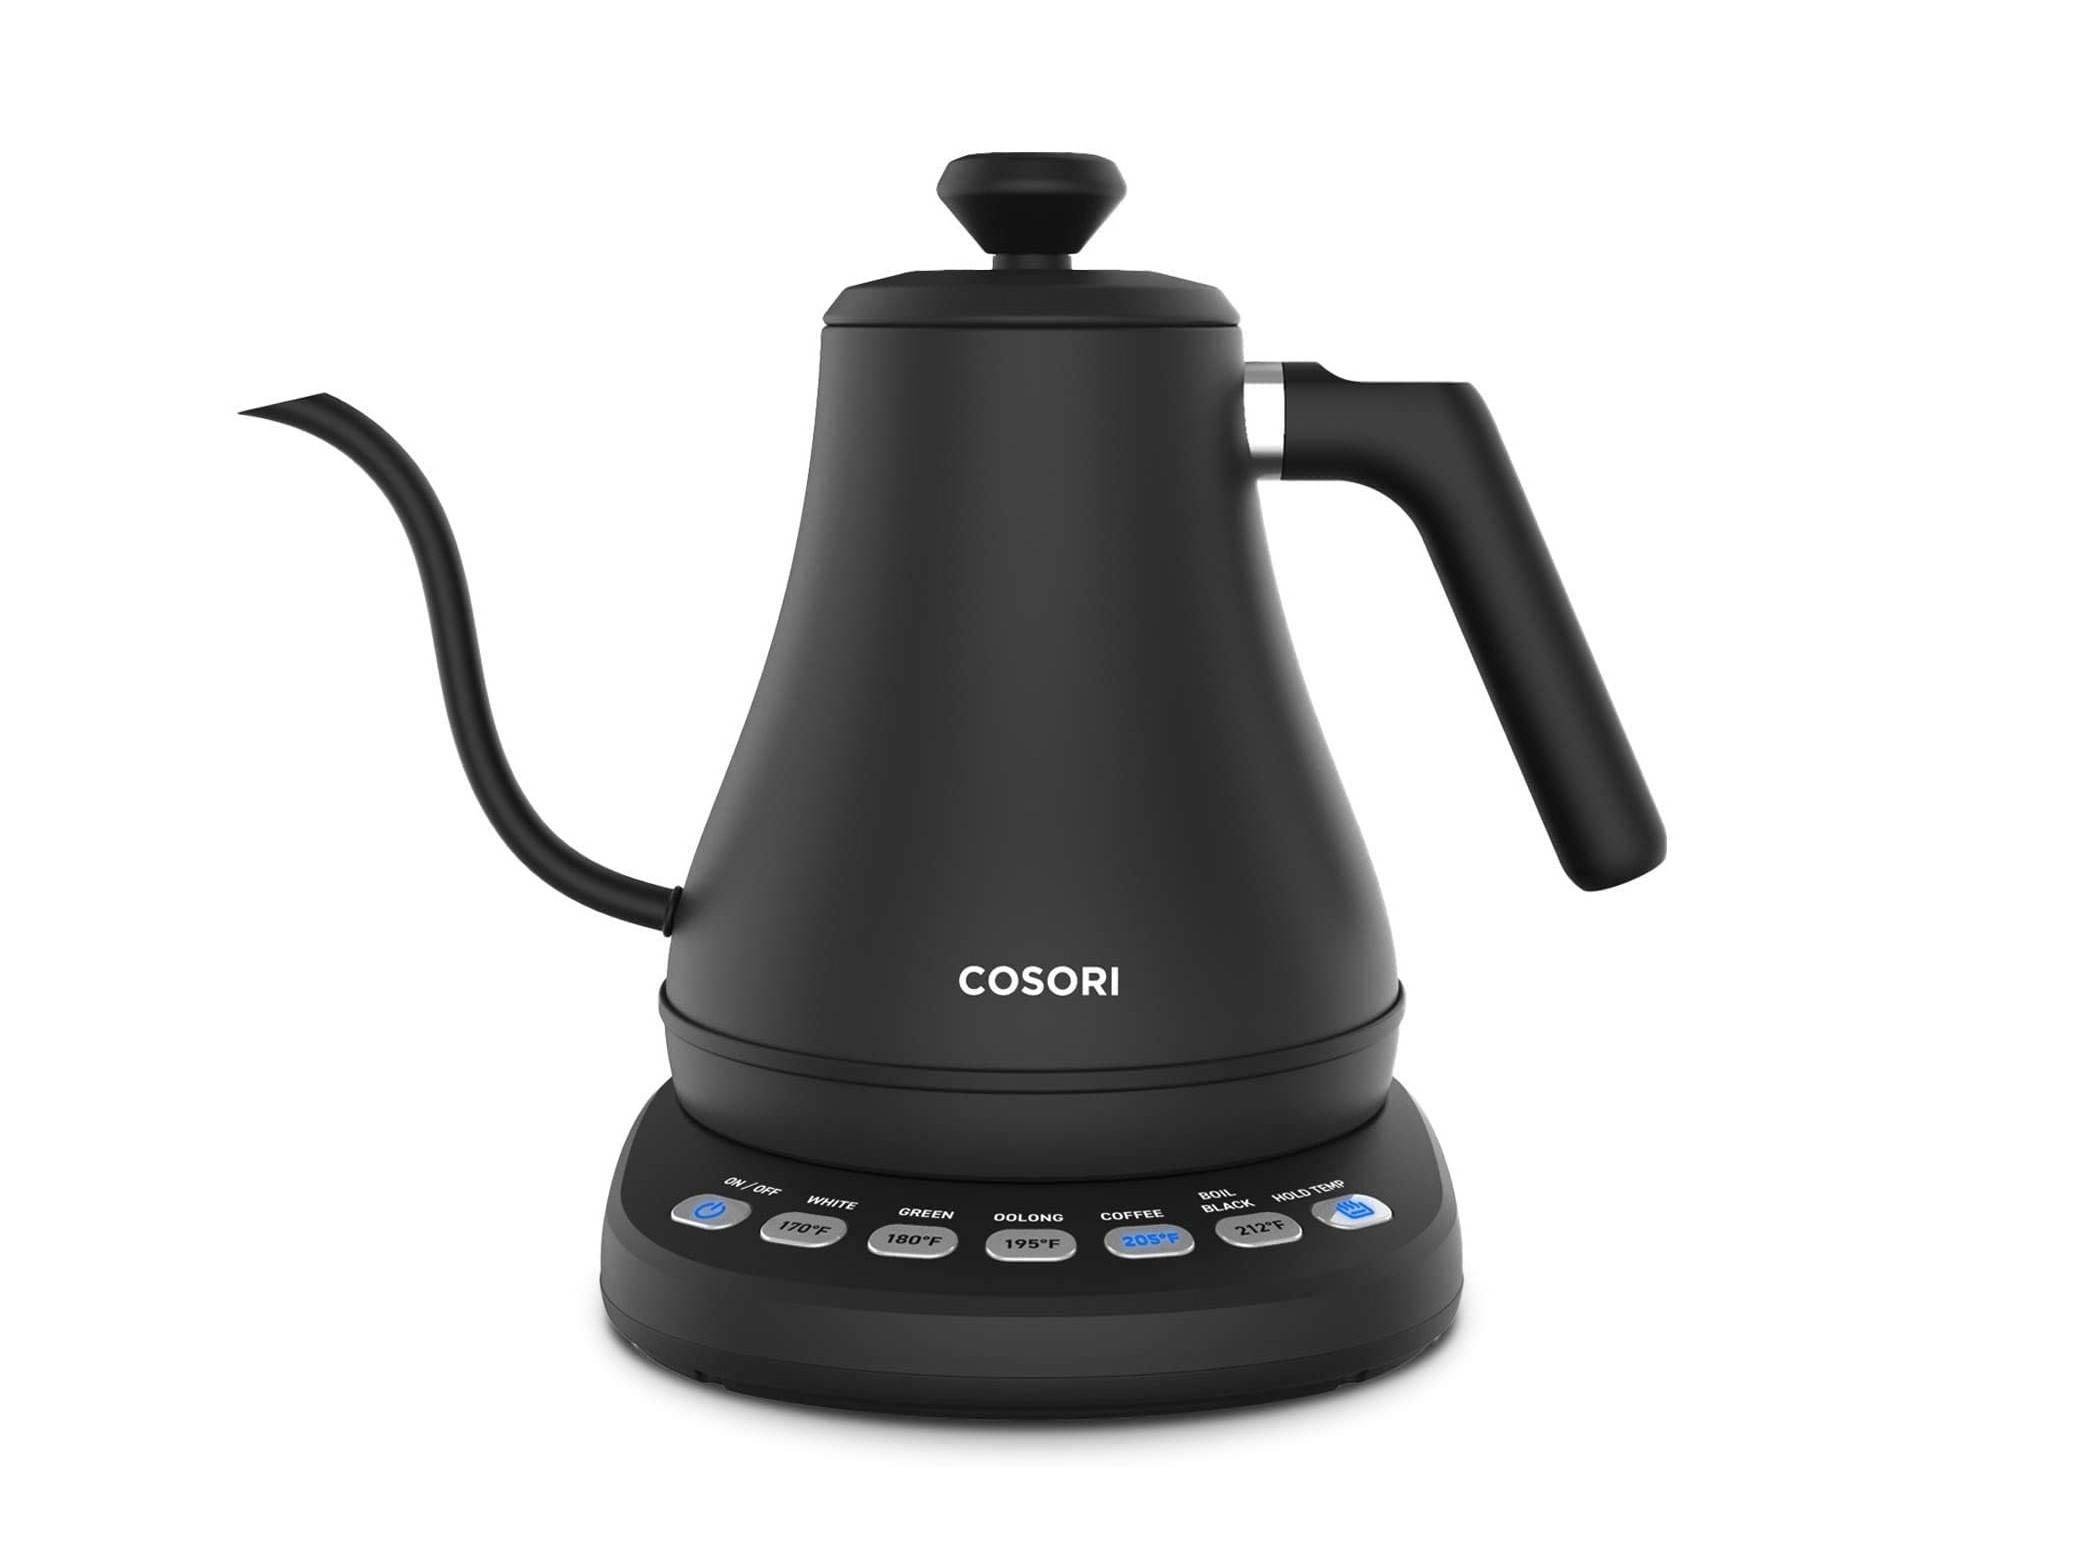 Cosori Electric Kettle Review with Videos